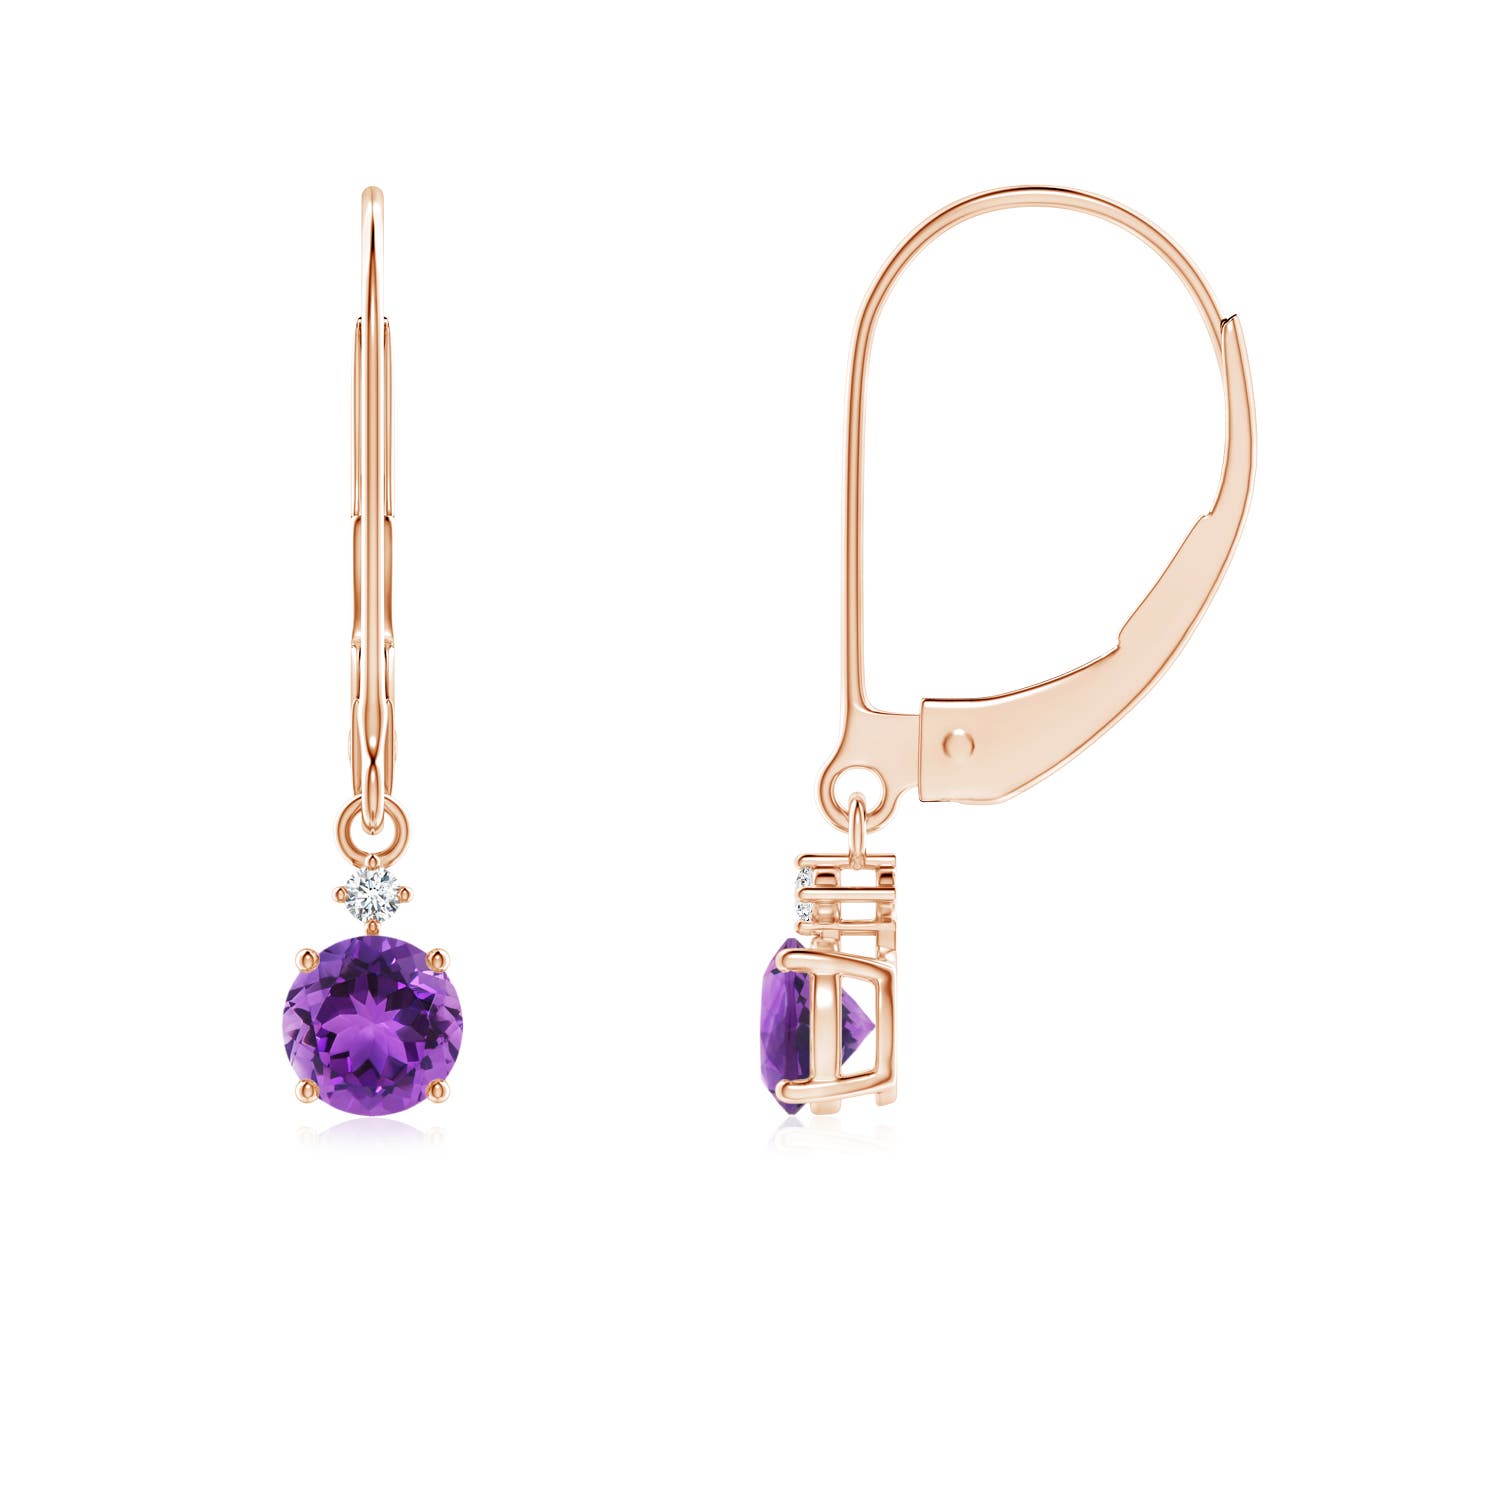 AAA - Amethyst / 0.52 CT / 14 KT Rose Gold